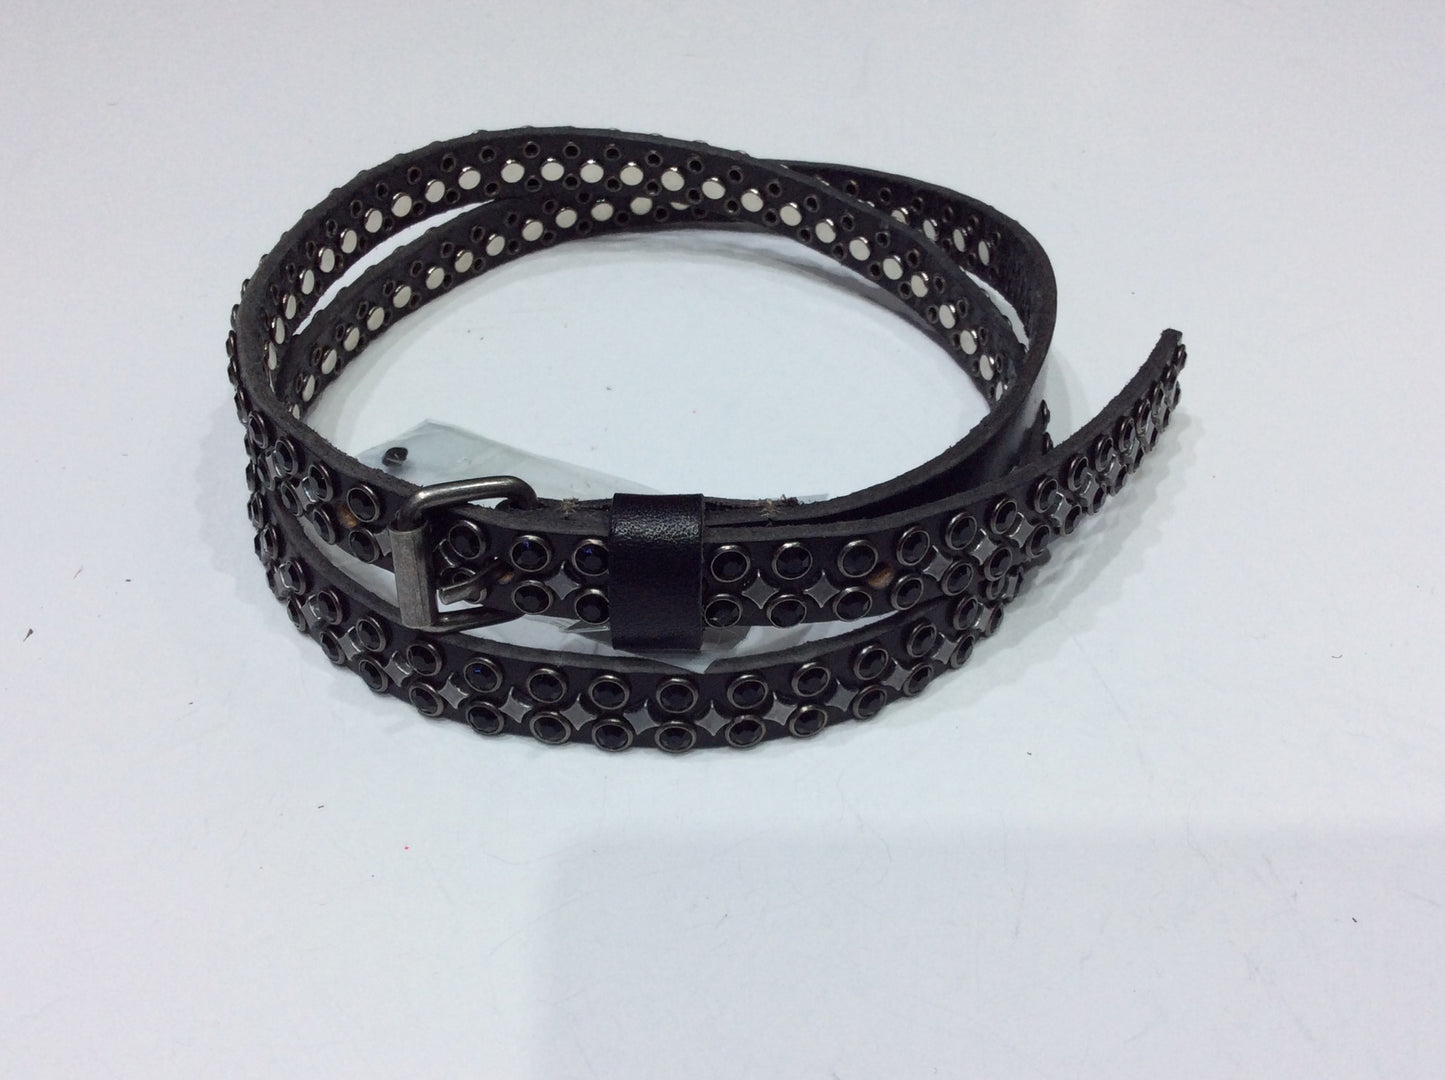 Belts-Narrow Width Black Leather with Black Crystals